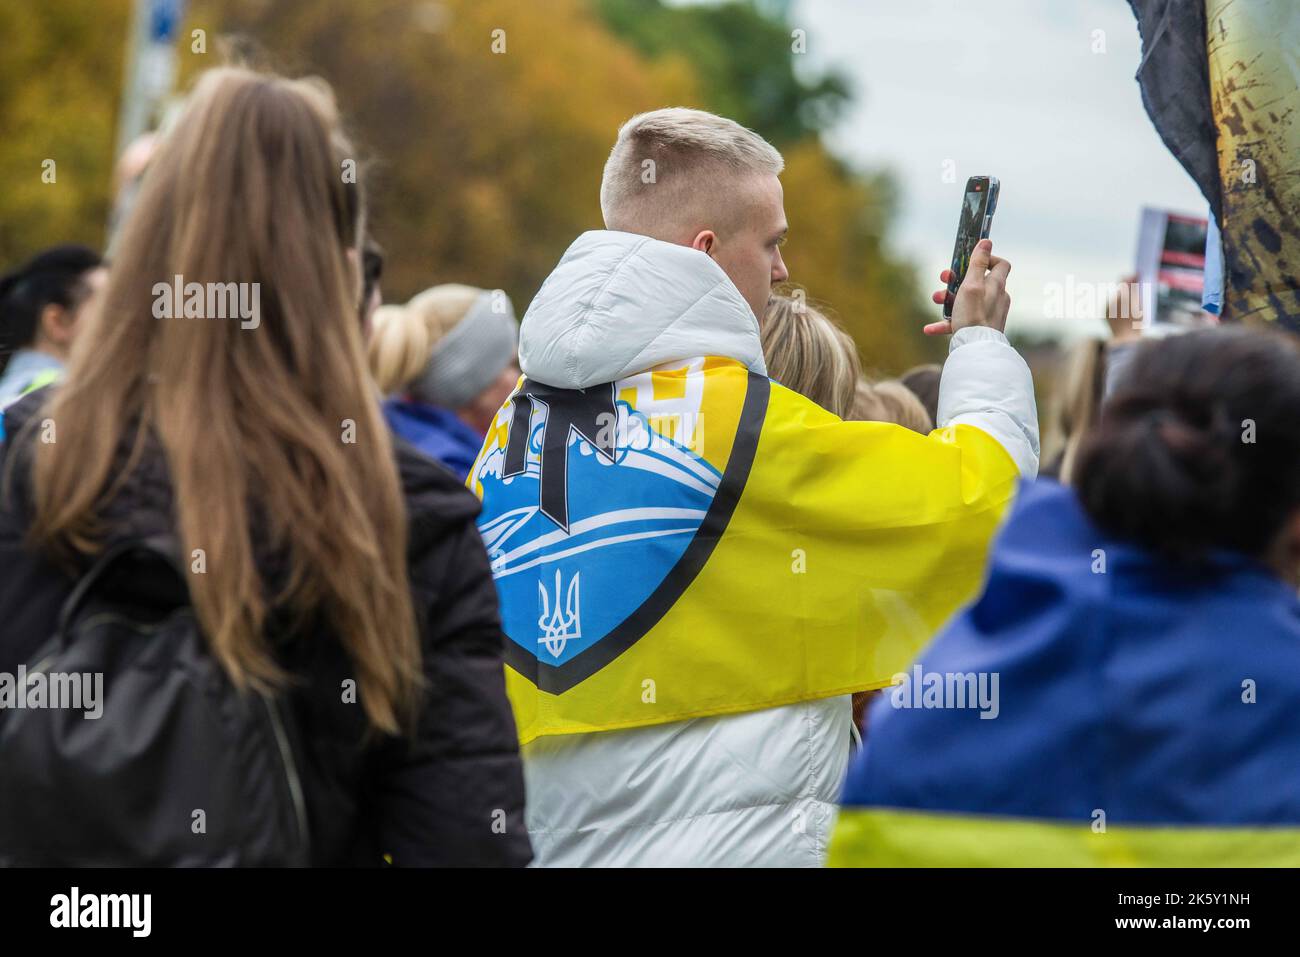 Munich, Bavaria, Germany. 10th Oct, 2022. Flag of the now-defunct Azov Battalion, which was dissolved and merged into the Ukrainian military. Remnants after ejection of the most radical elements remained as the Azov Regiment, who incorporated soldiers of various backgrounds according to Ukrainian military. In the wake of the bombing of the Kerch (Crimea) Bridge over the weekend, Russia has retaliated by indiscriminate rocket and missile attacks on civilians and civilian infrastructure, prompting refugees and Germans in Munich to demand the international community declare Russia as a terrori Stock Photo